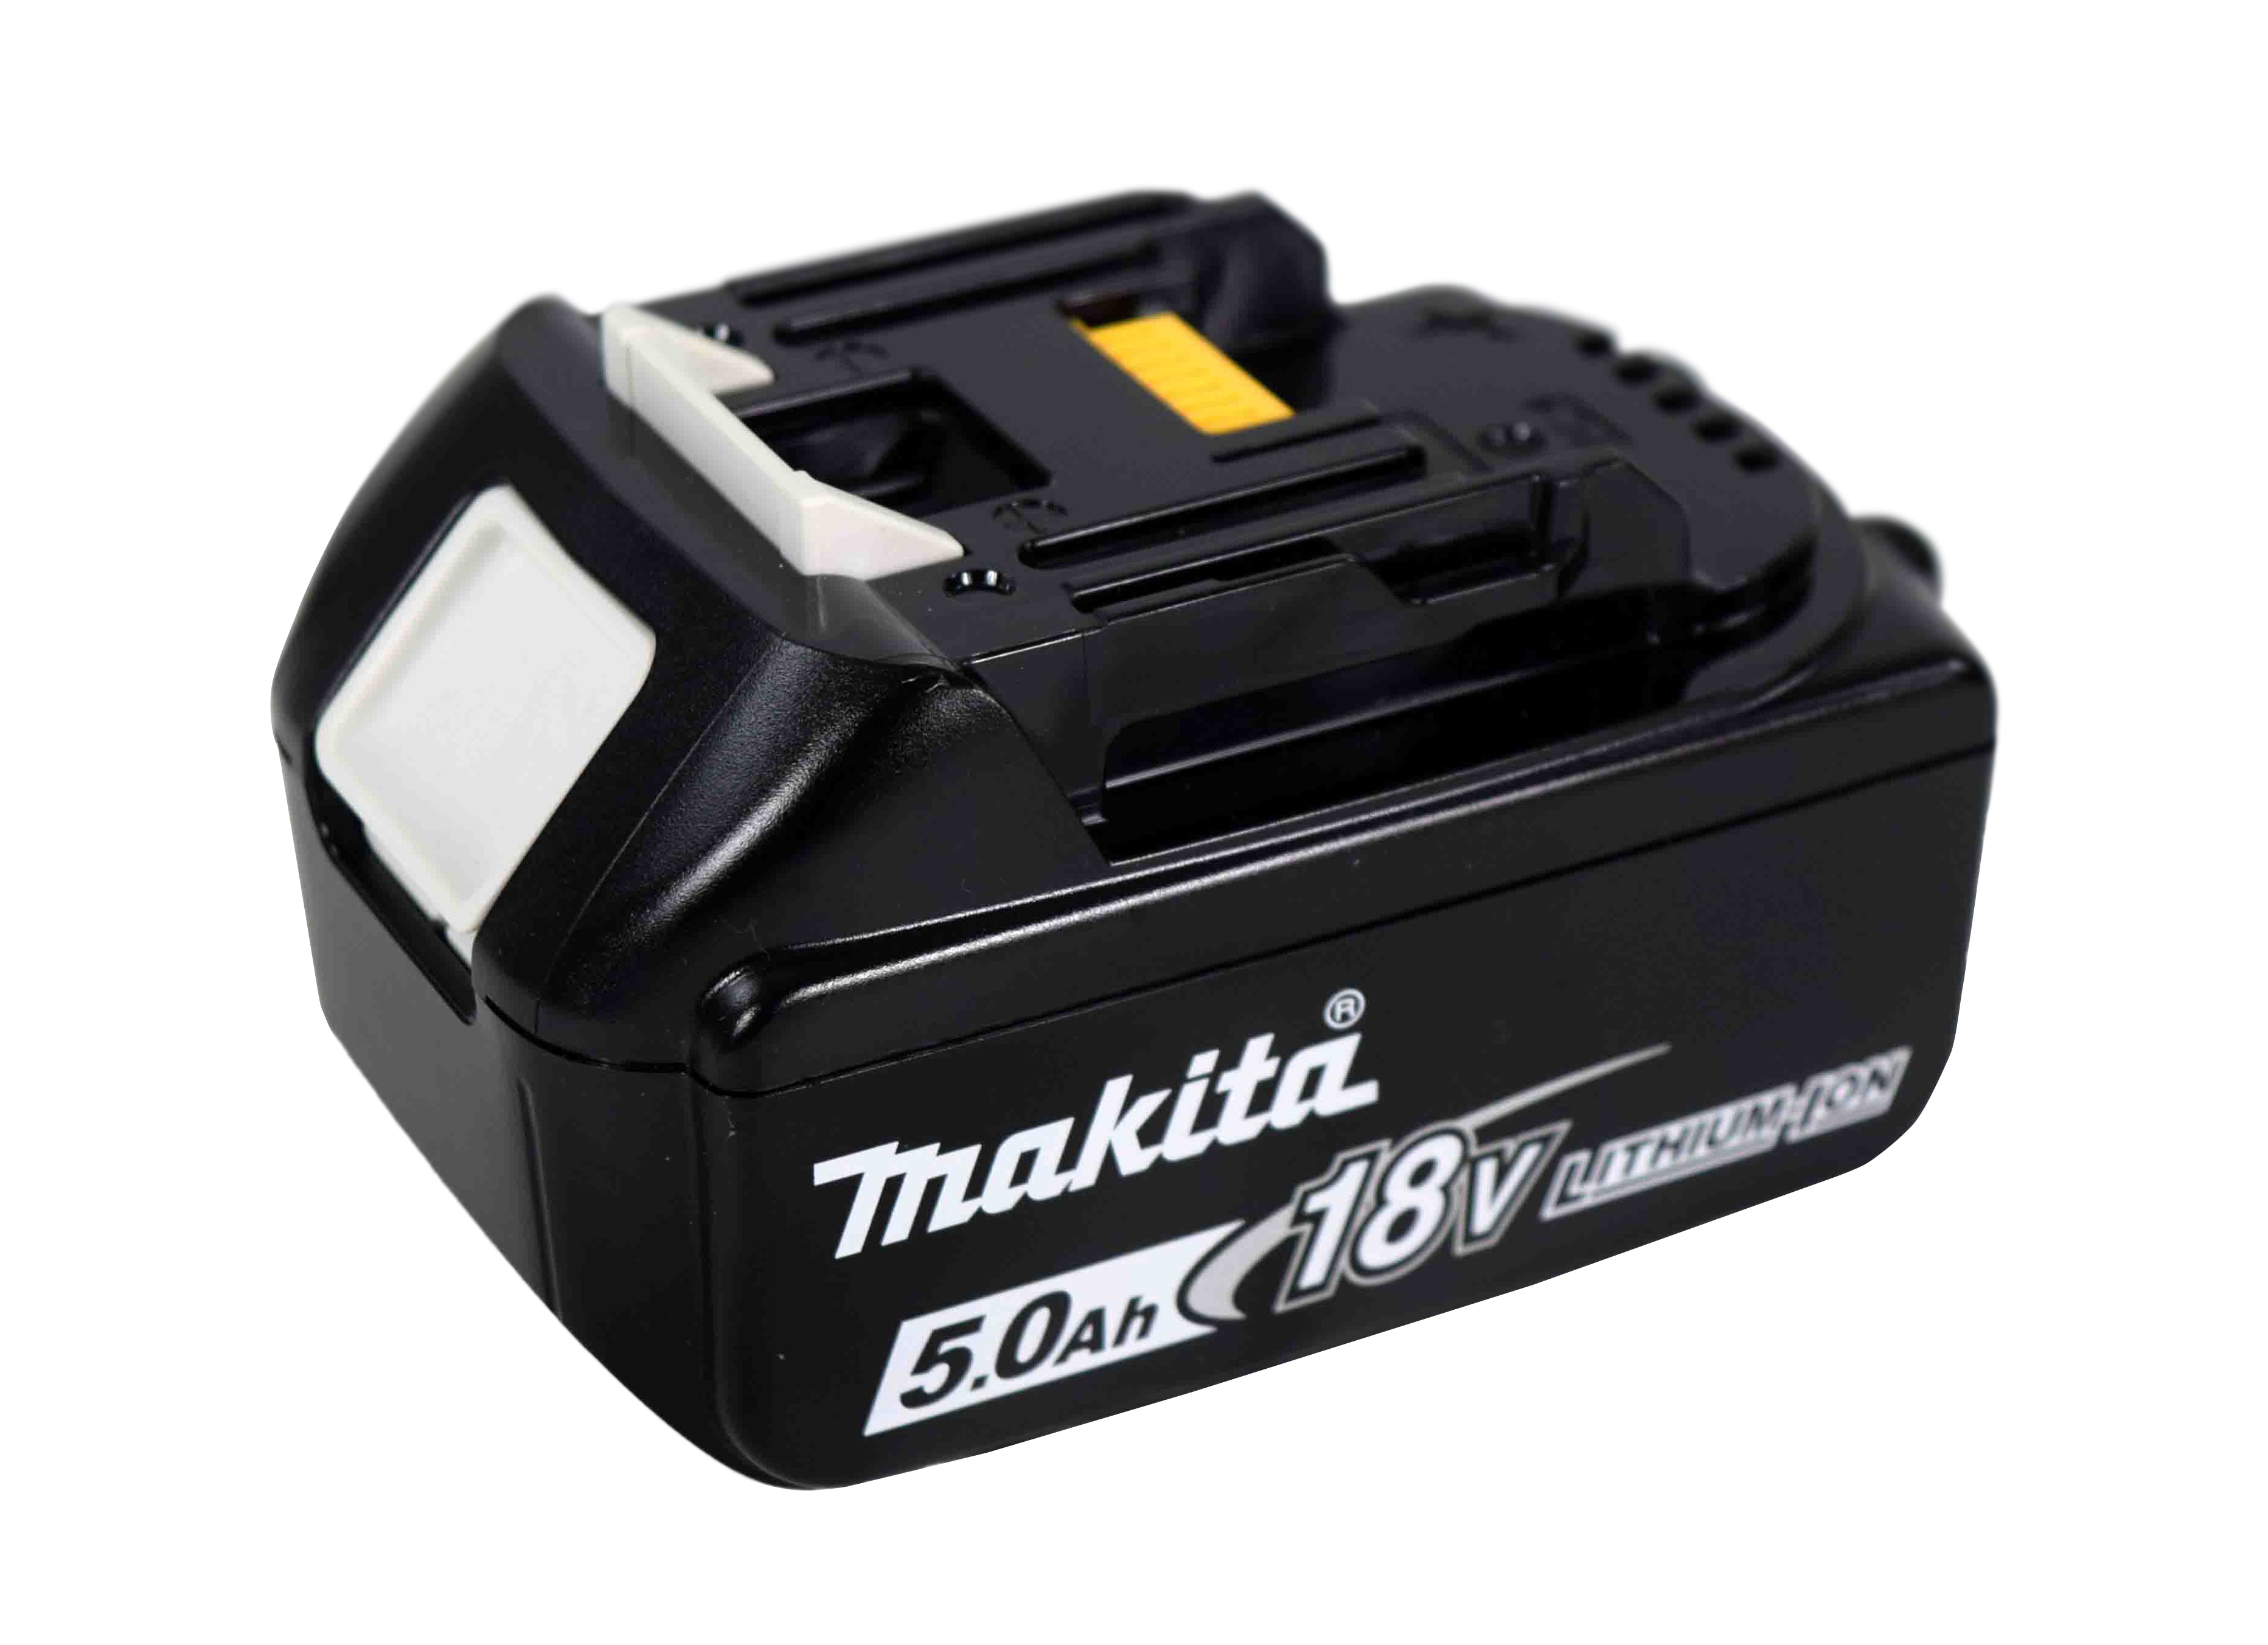 Makita BL1850B 18V LXT Lithium-Ion 5.0Ah Battery w/ Charger Indicator